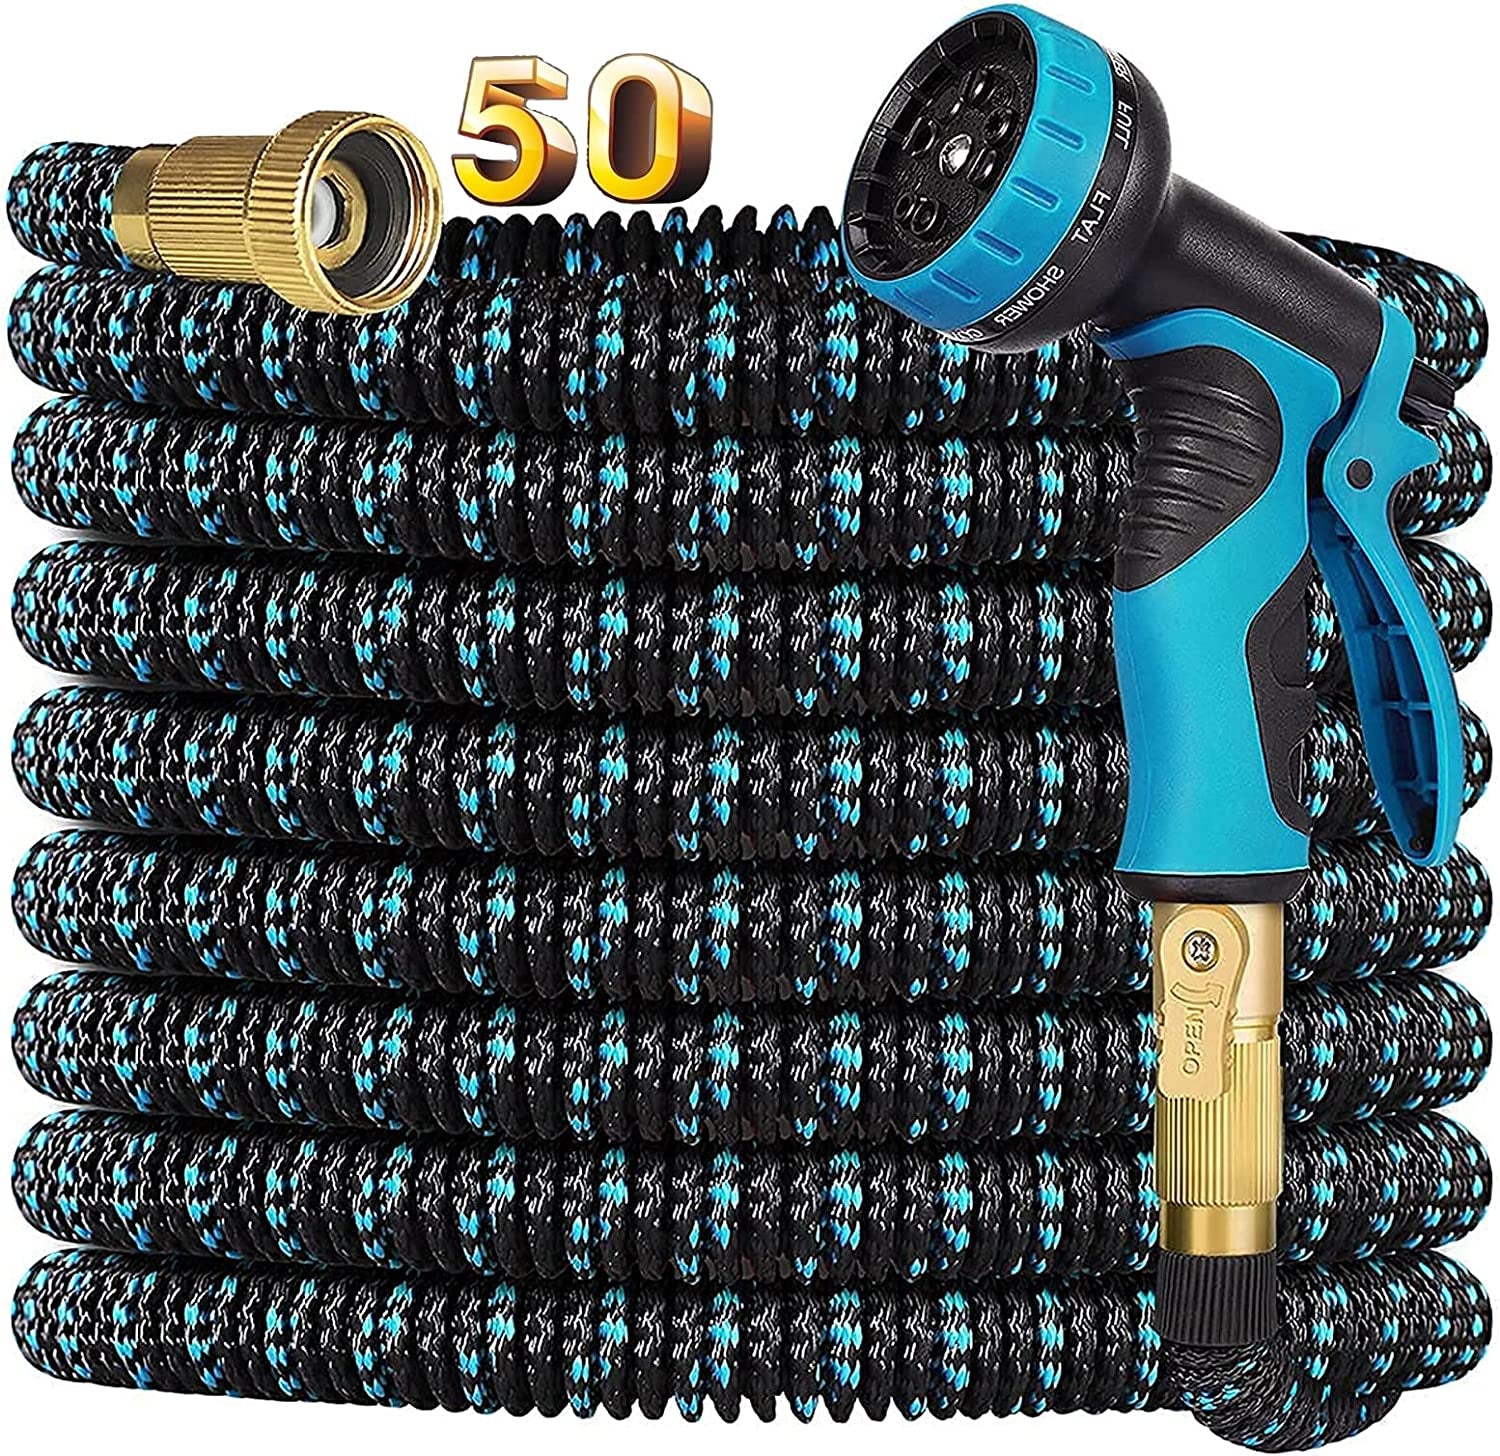 Wuciray, Garden Hose Expandable, Wuciray 50Ft(15M) Retractable Water Hose with 10 Function Spray Gun, 3/4" Solid Extra-Strong Solid Brass Connectors, High Pressure Garden Hoses Set with Durable 3-Layers Latex